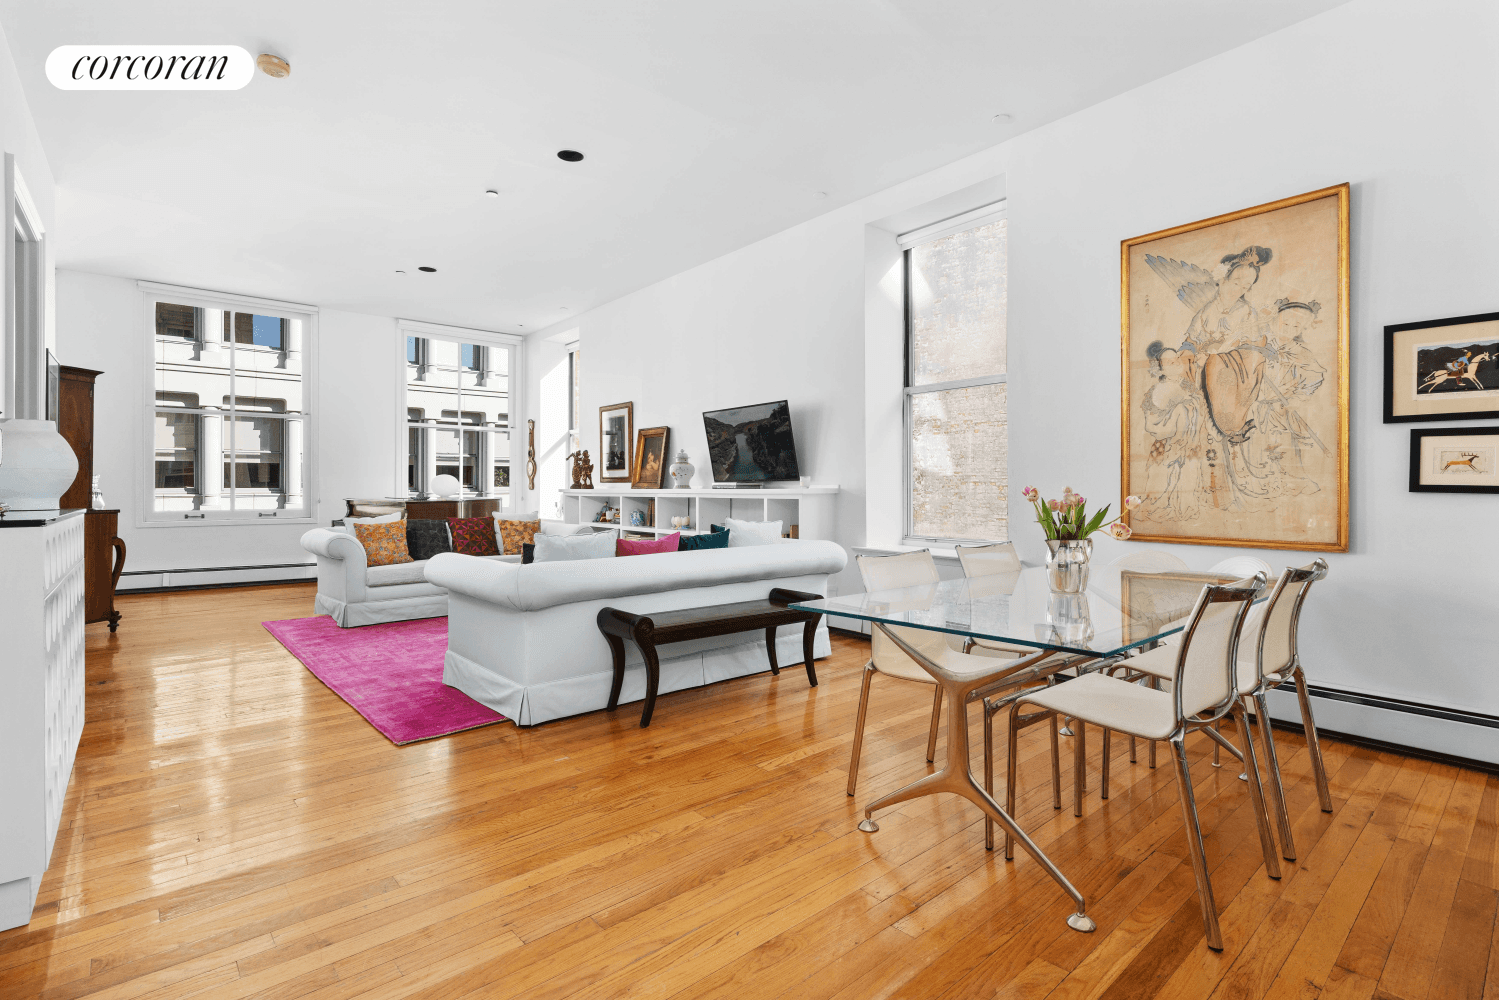 Just in time for the Summer, we're offering a rare opportunity to live in this gorgeous, fully furnished Greene House loft in Soho !